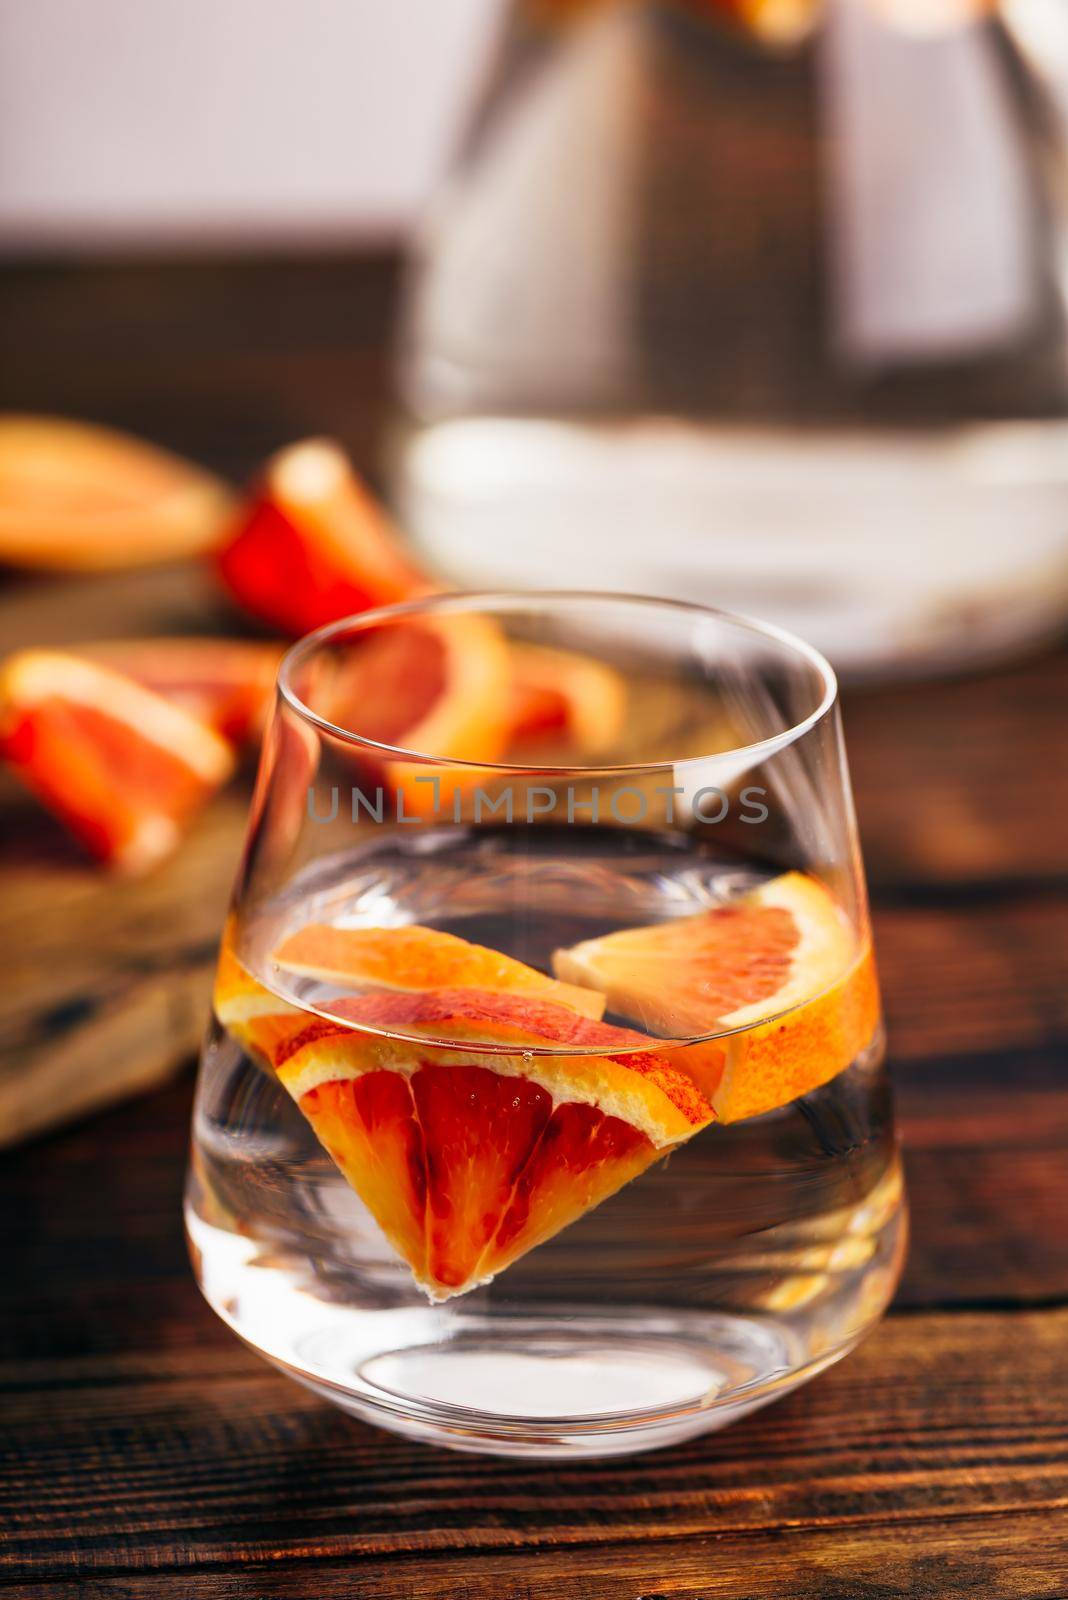 Infused water with bloody oranges by Seva_blsv